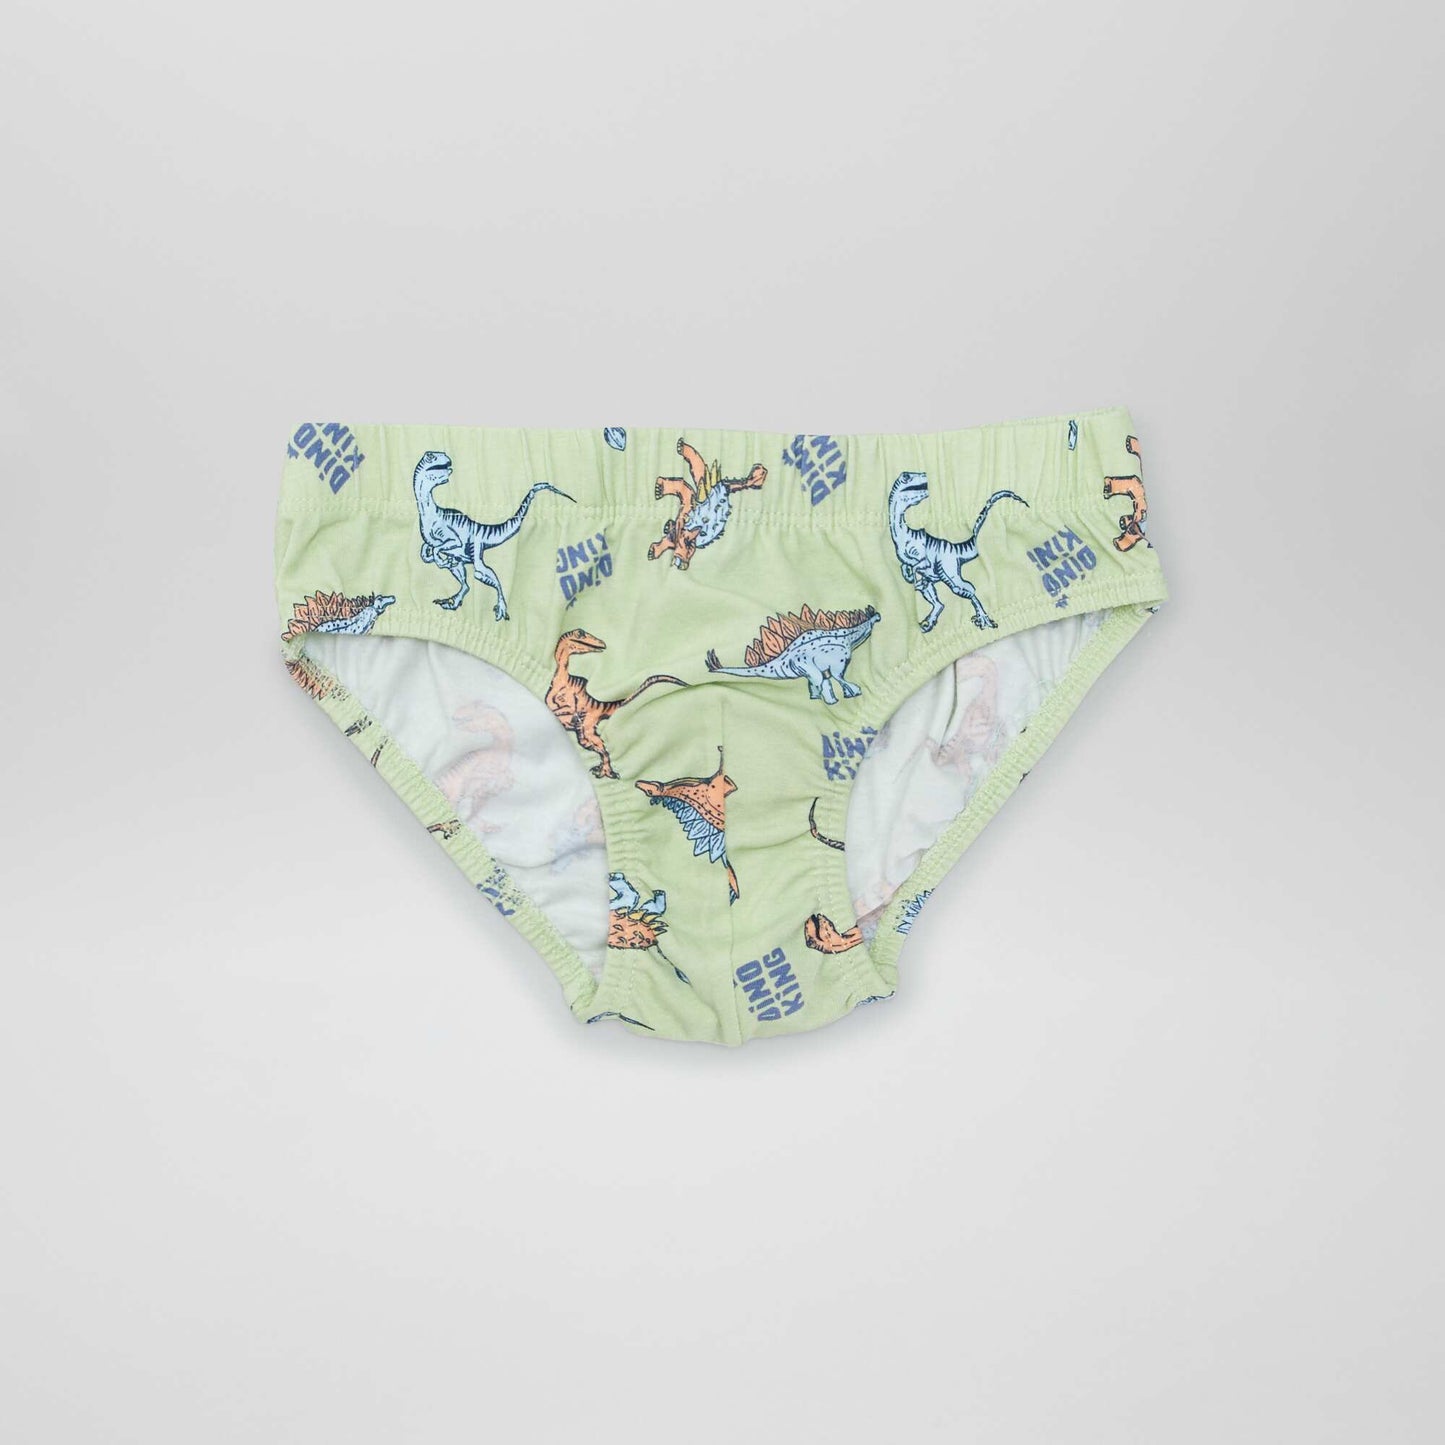 Pack of 7 pairs of printed briefs BLUE